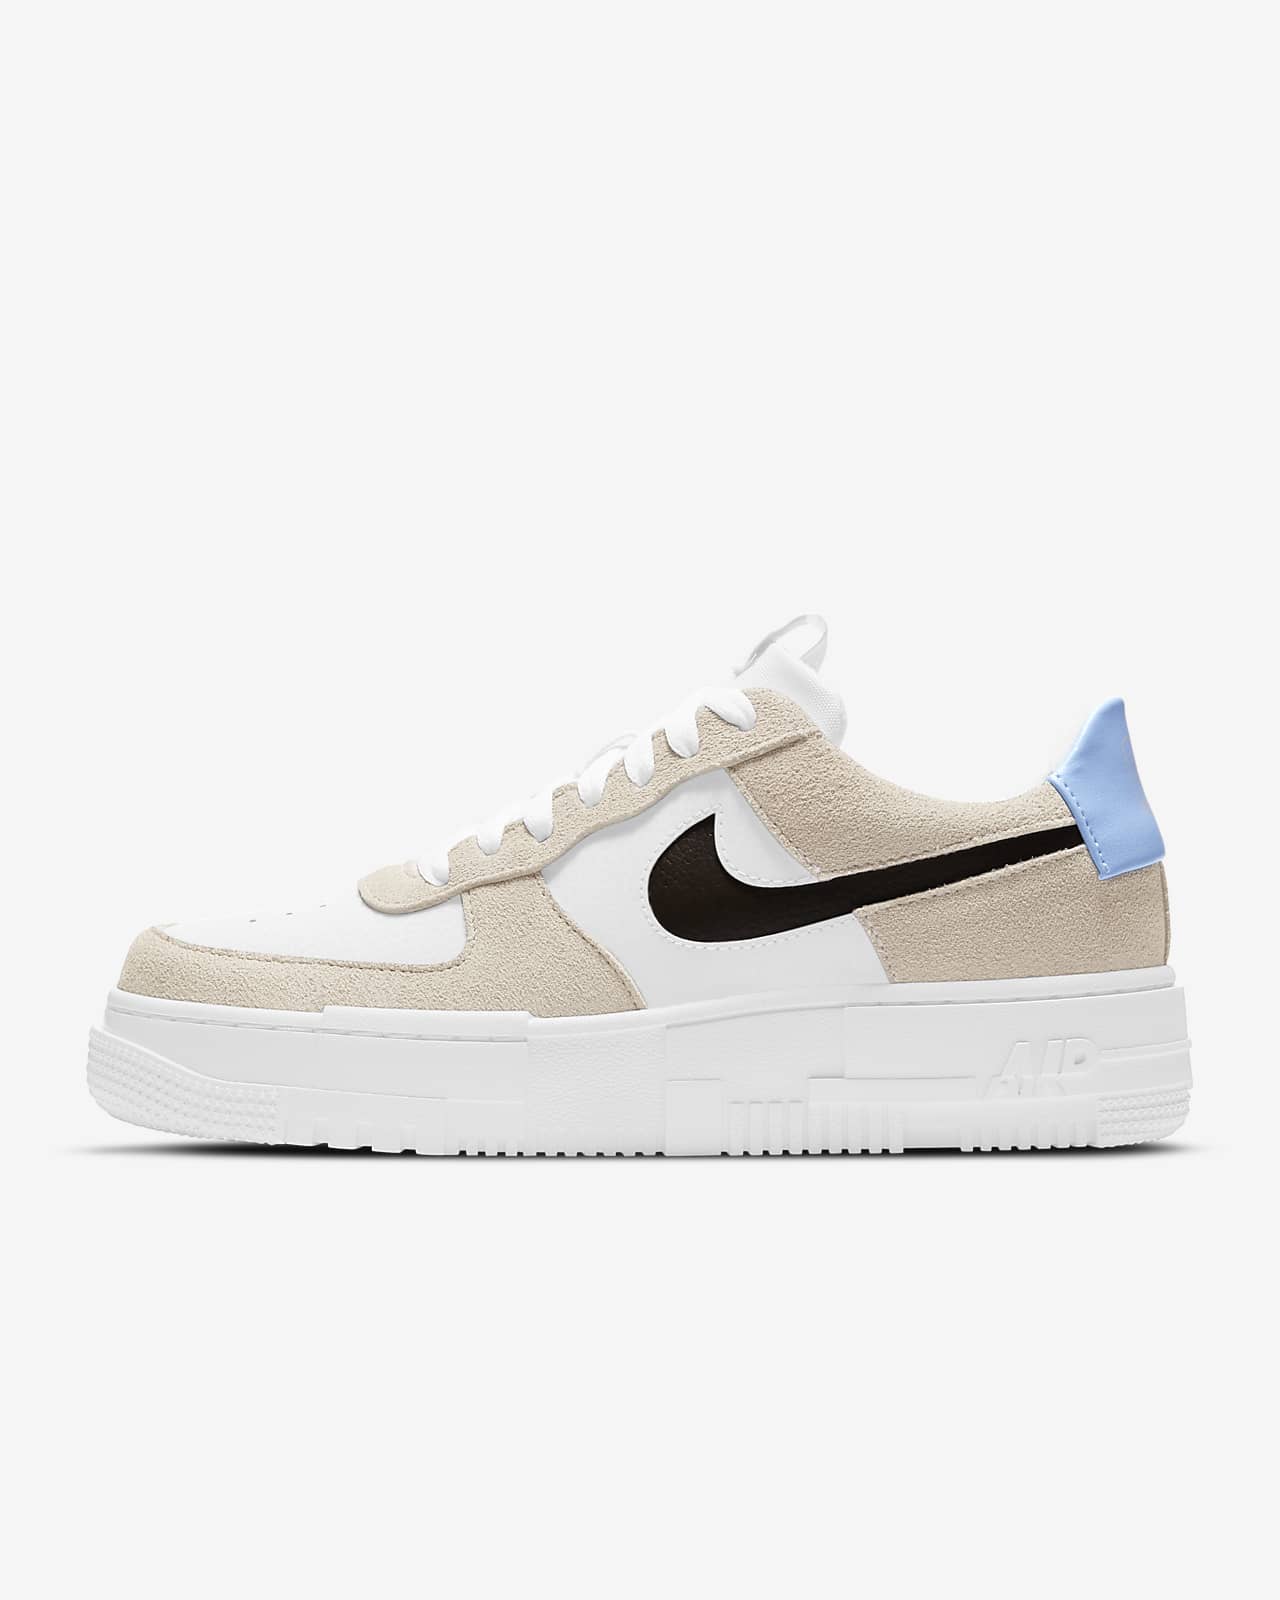 nike airforce 1s womens